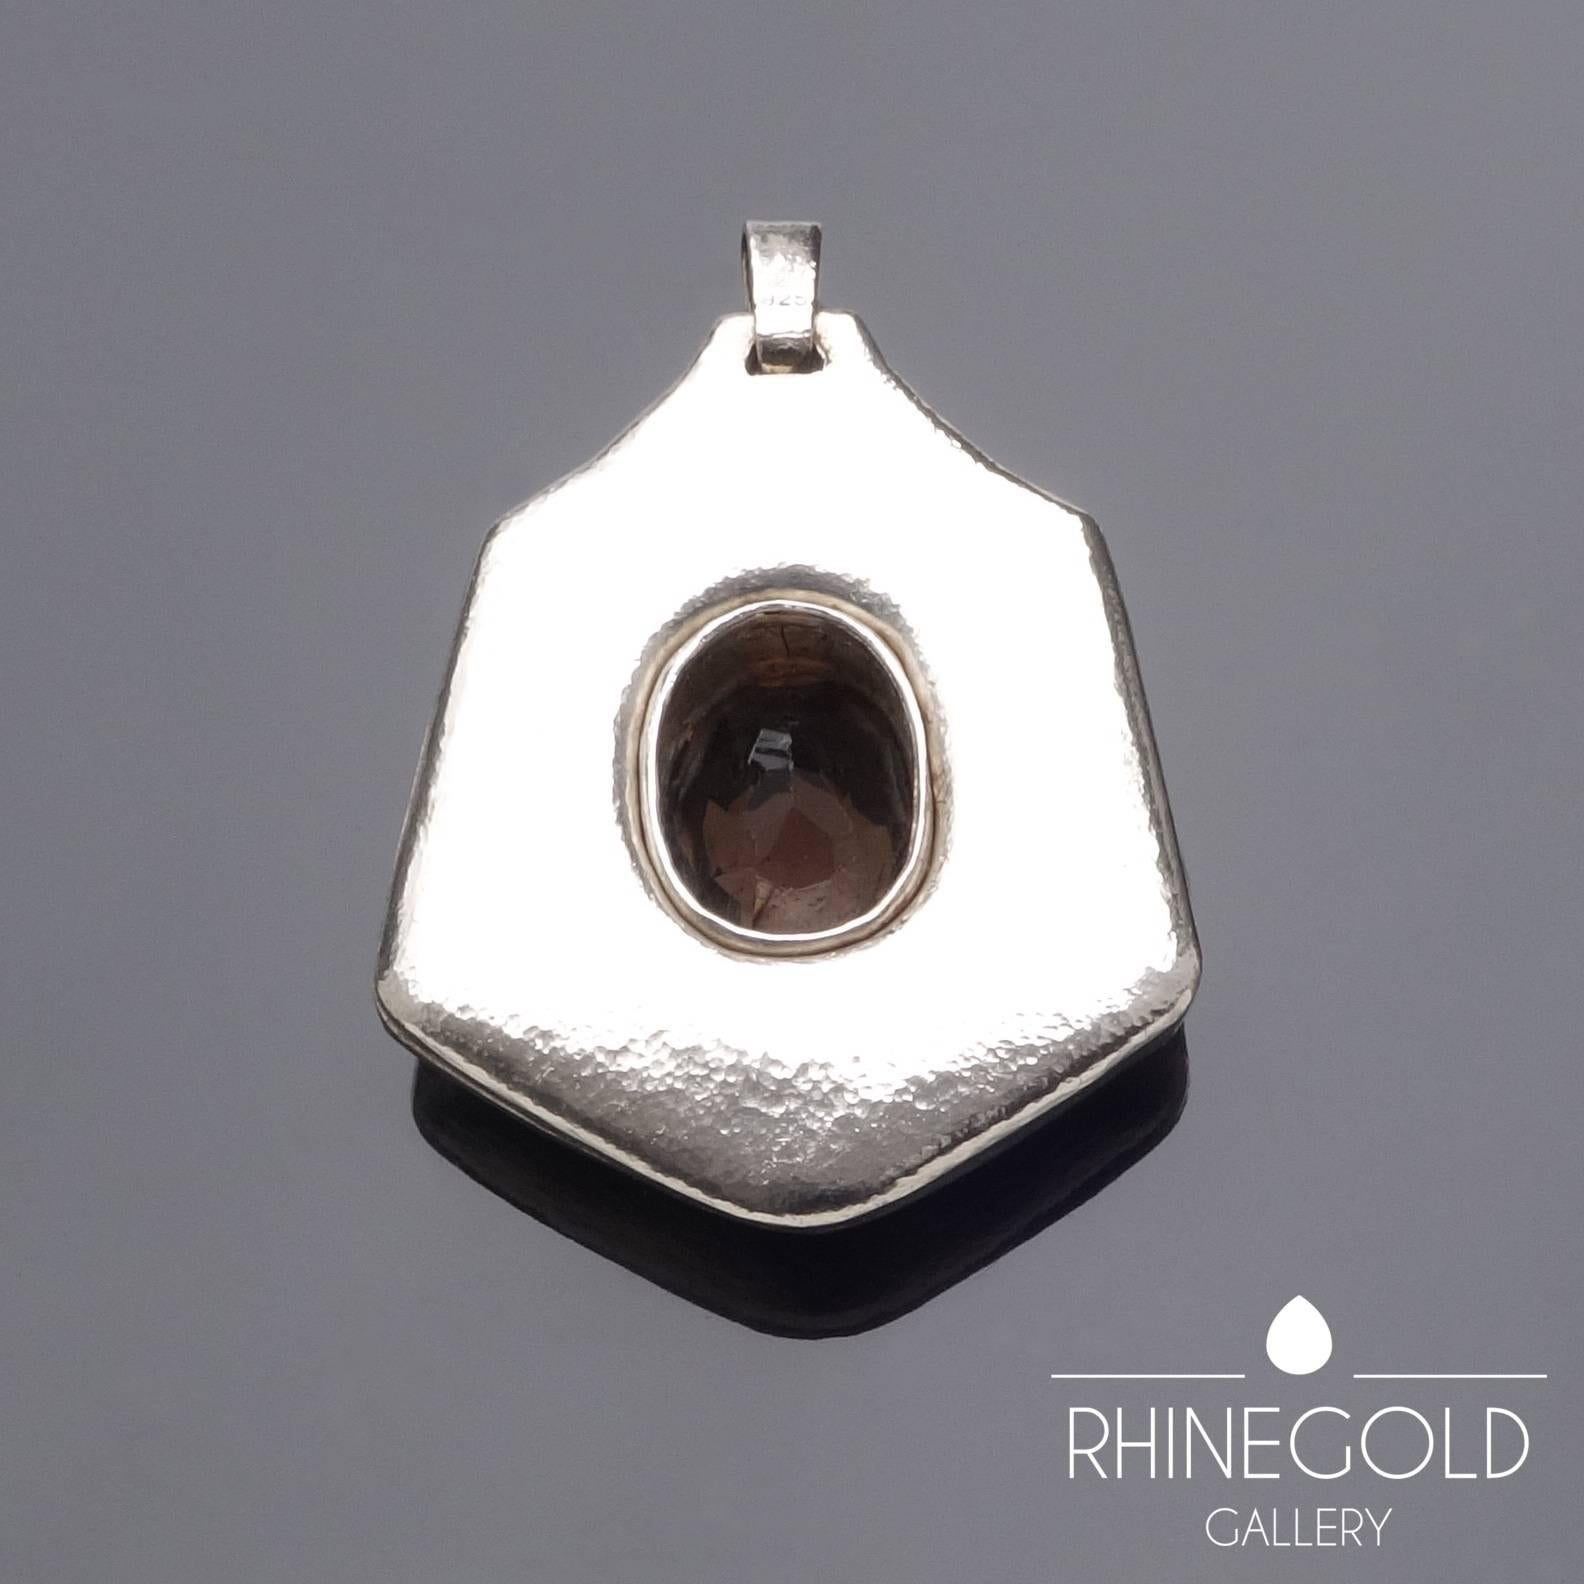 Rudolf Steiner Anthroposophical Smokey Quartz Sterling Silver Pendant 
Sterling silver, smokey quartz
Height (with bail) 5.8 cm (approx 2 1/4"), width 4.0 cm (approx. 1 9/16")
Marks: Sterling silver content mark ‘925’, maker’s mark